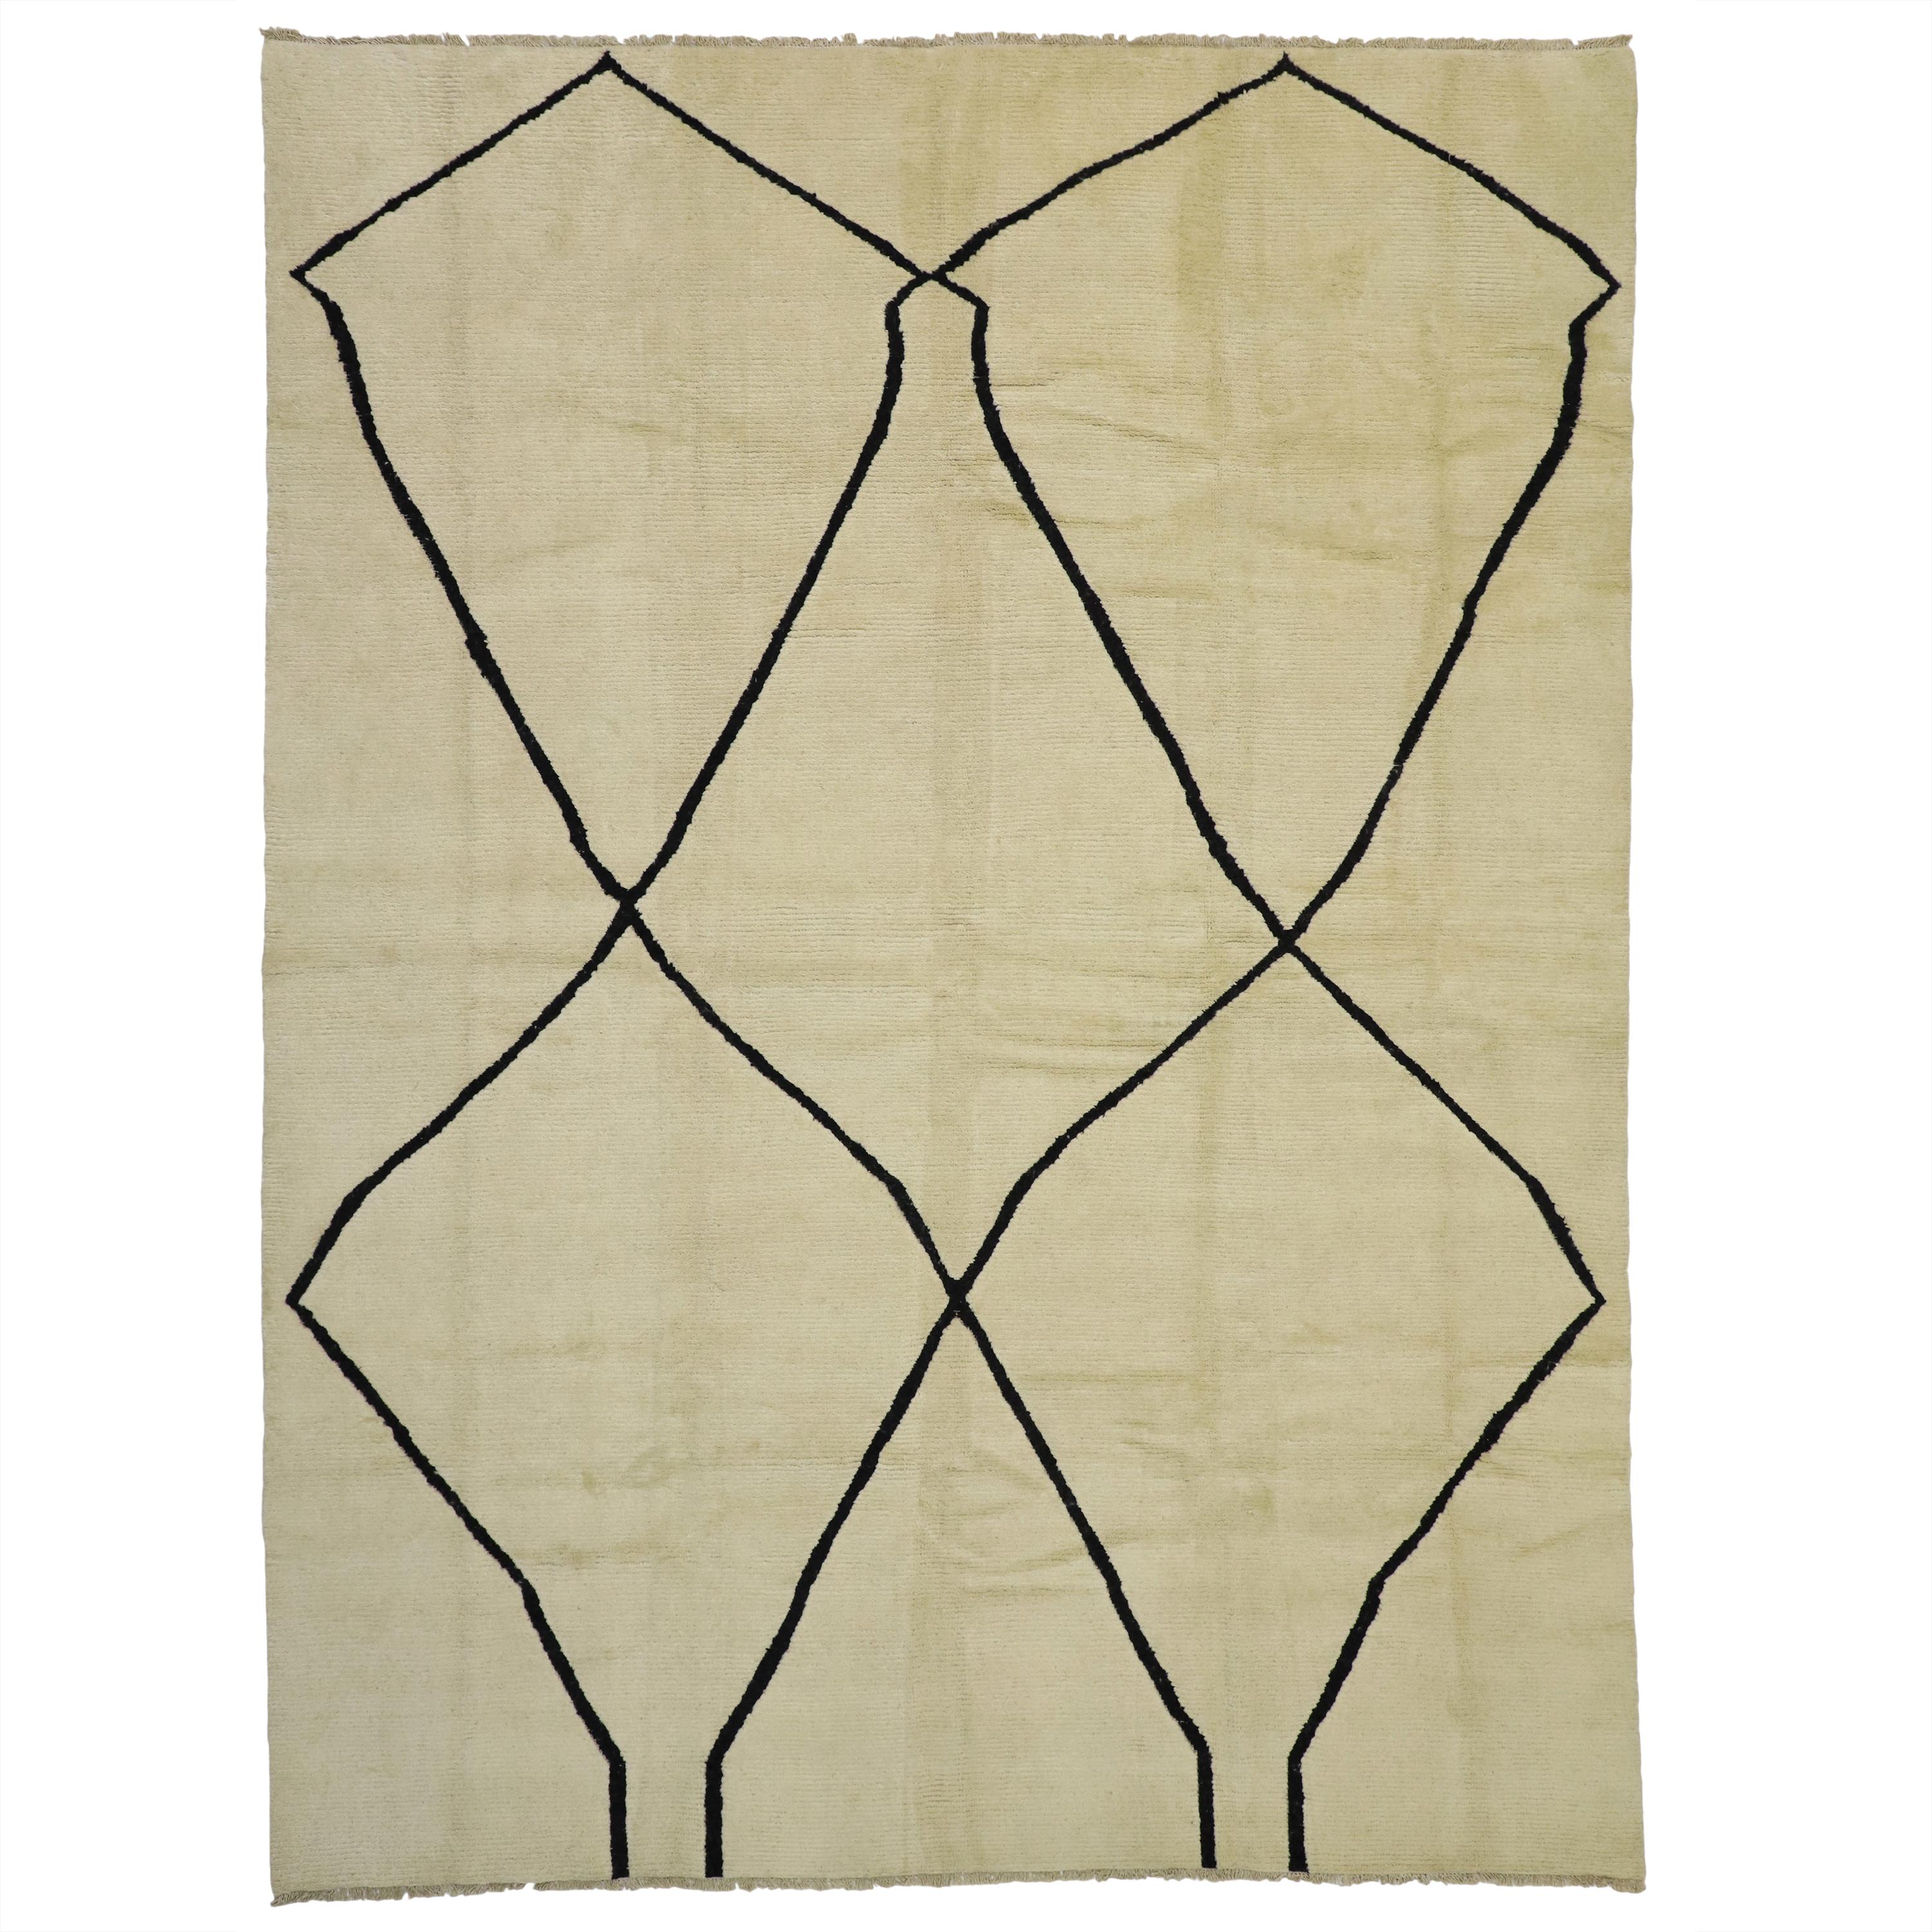 New Contemporary Moroccan Area Rug with Organic Modern Style